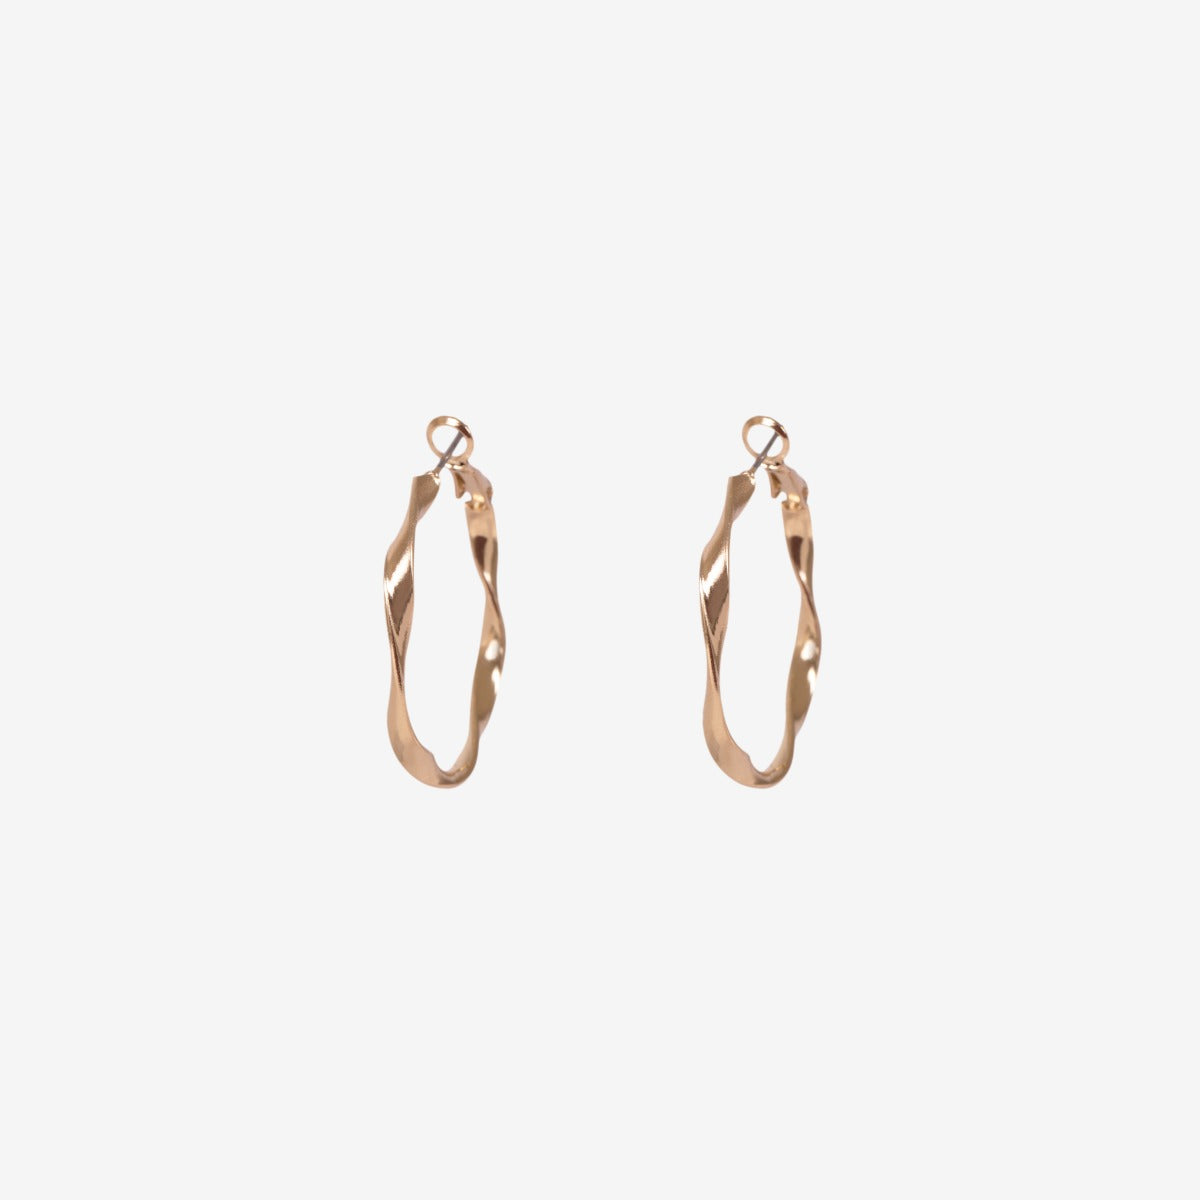 Twisted hoop earrings and sparkling stones